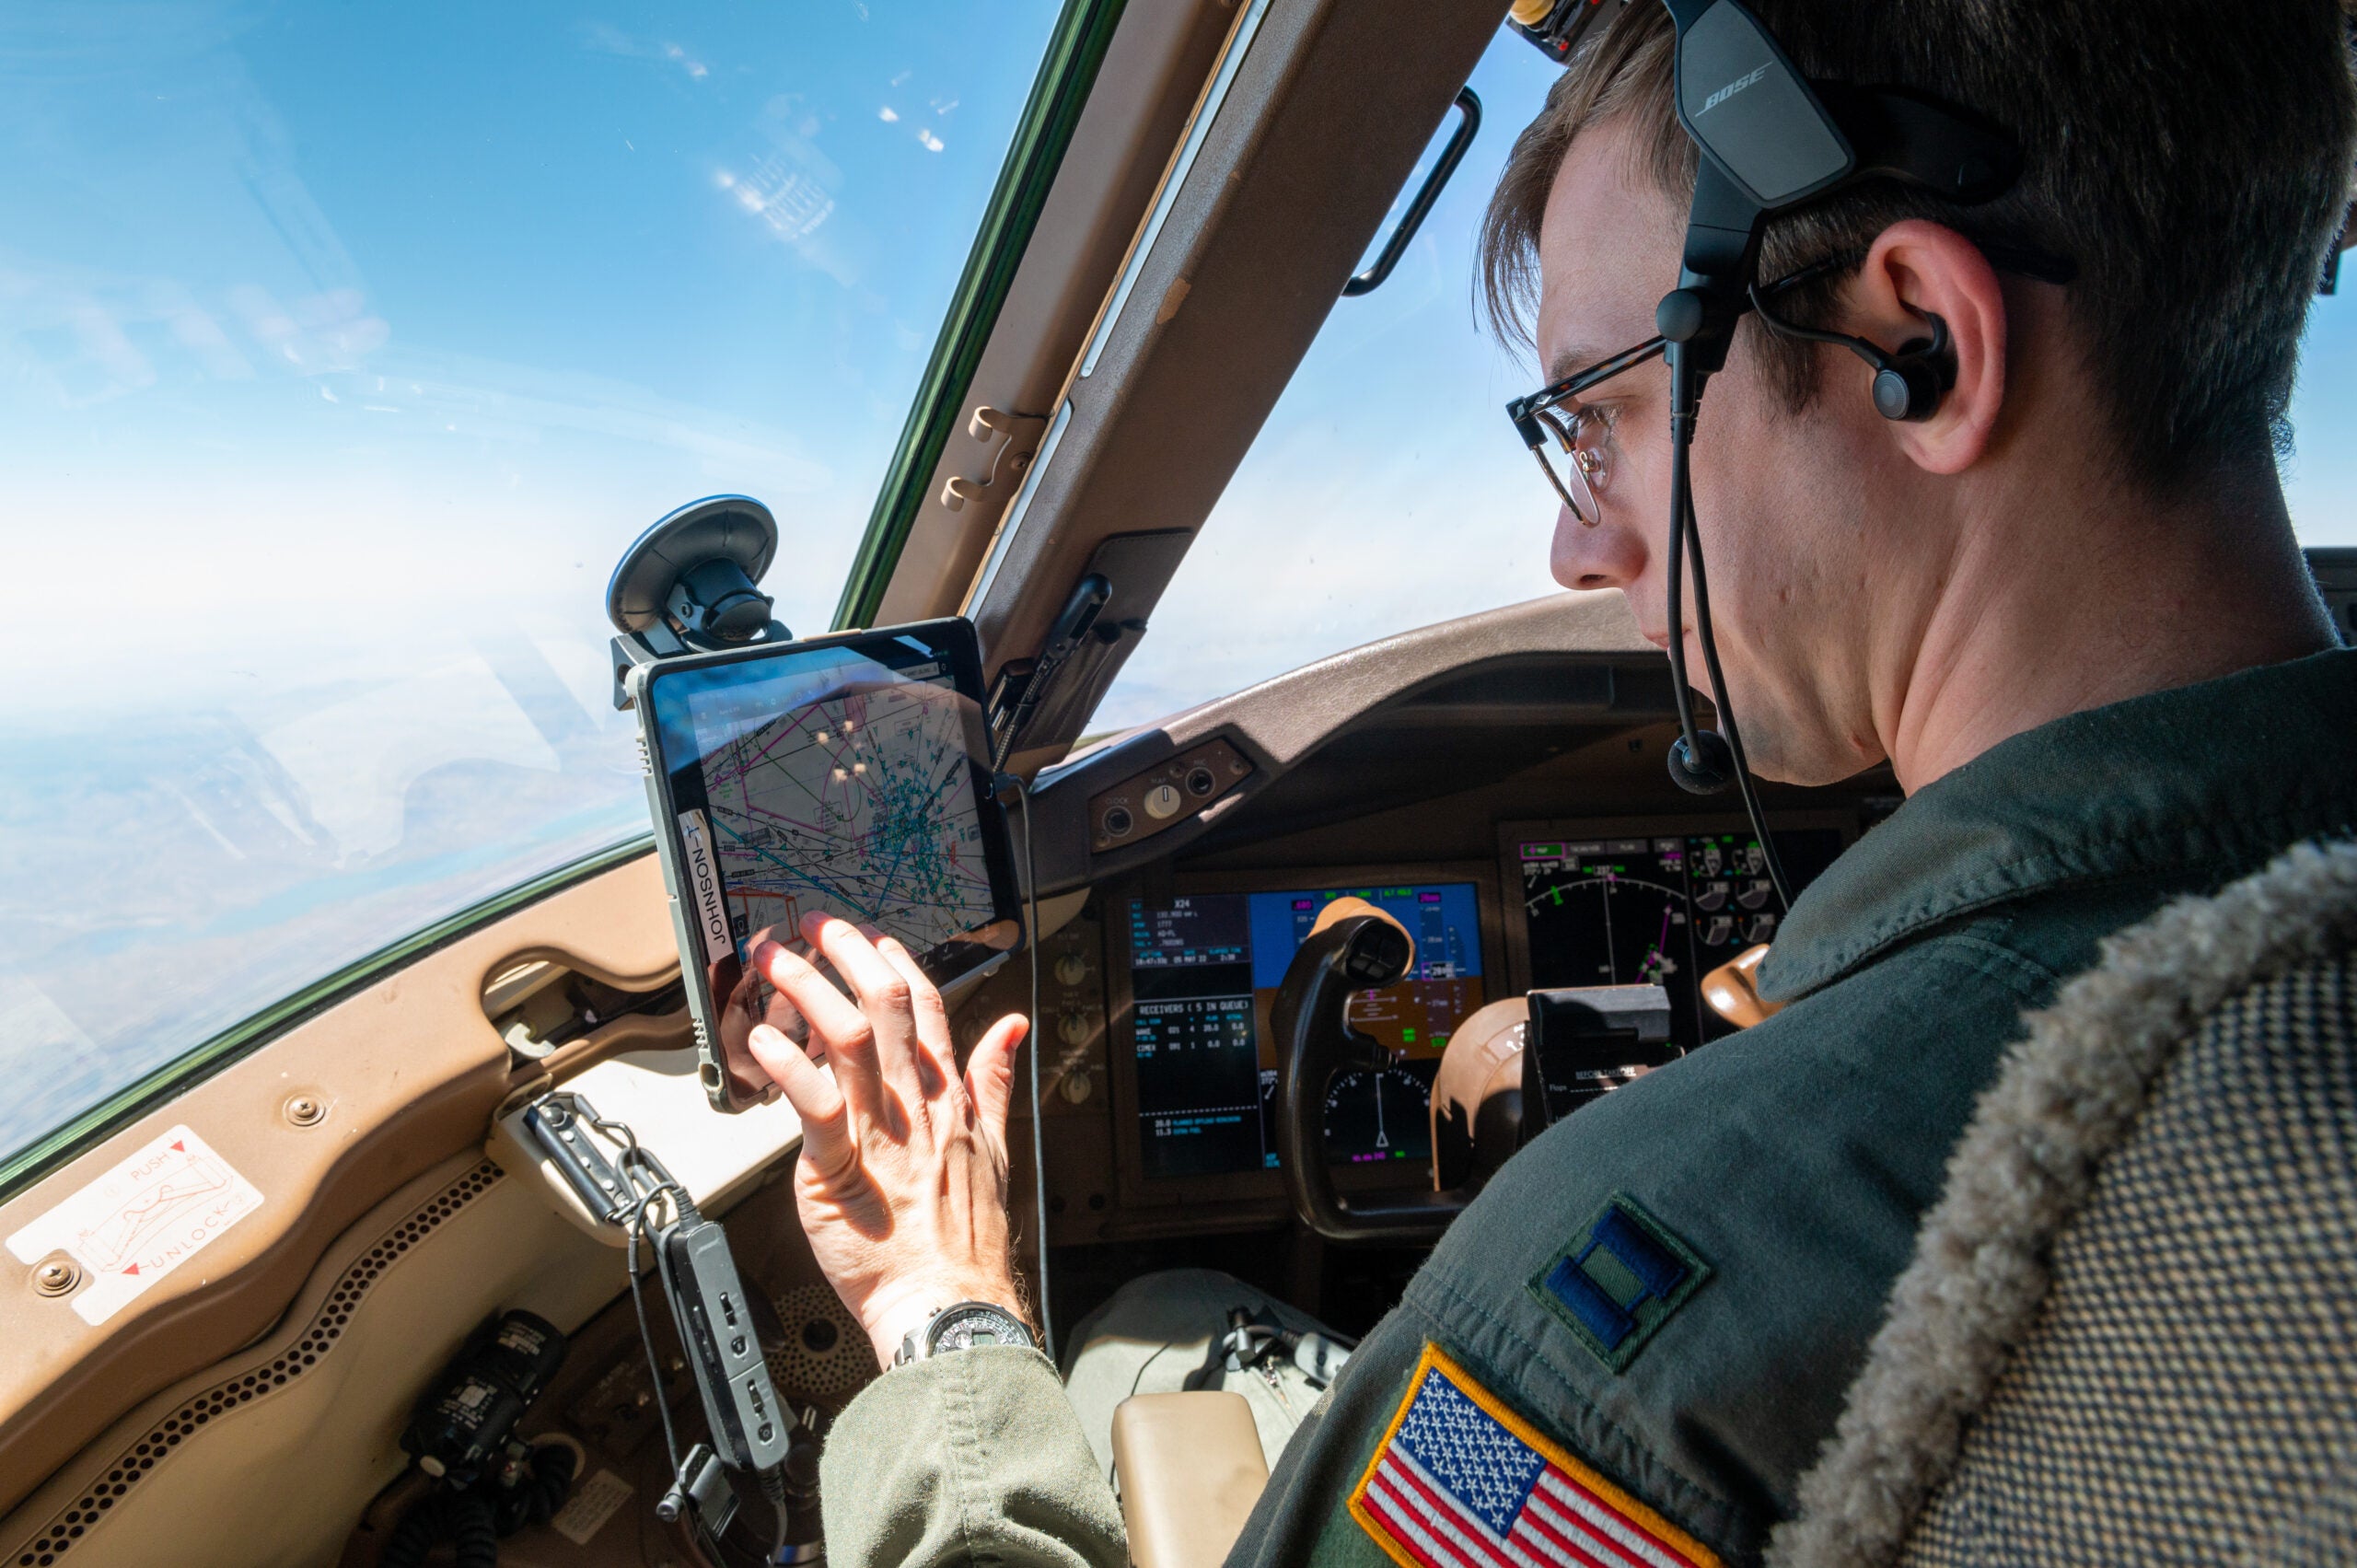 Captain Taylor Johnson, 349th Air Refueling Squadron instructor pilot, checks the flight path details May 5, 2022. Johnson is able to see live updates of weather, air traffic and flight plans using a Stratus puck. (U.S. Air Force photo by Airman Brenden Beezley)